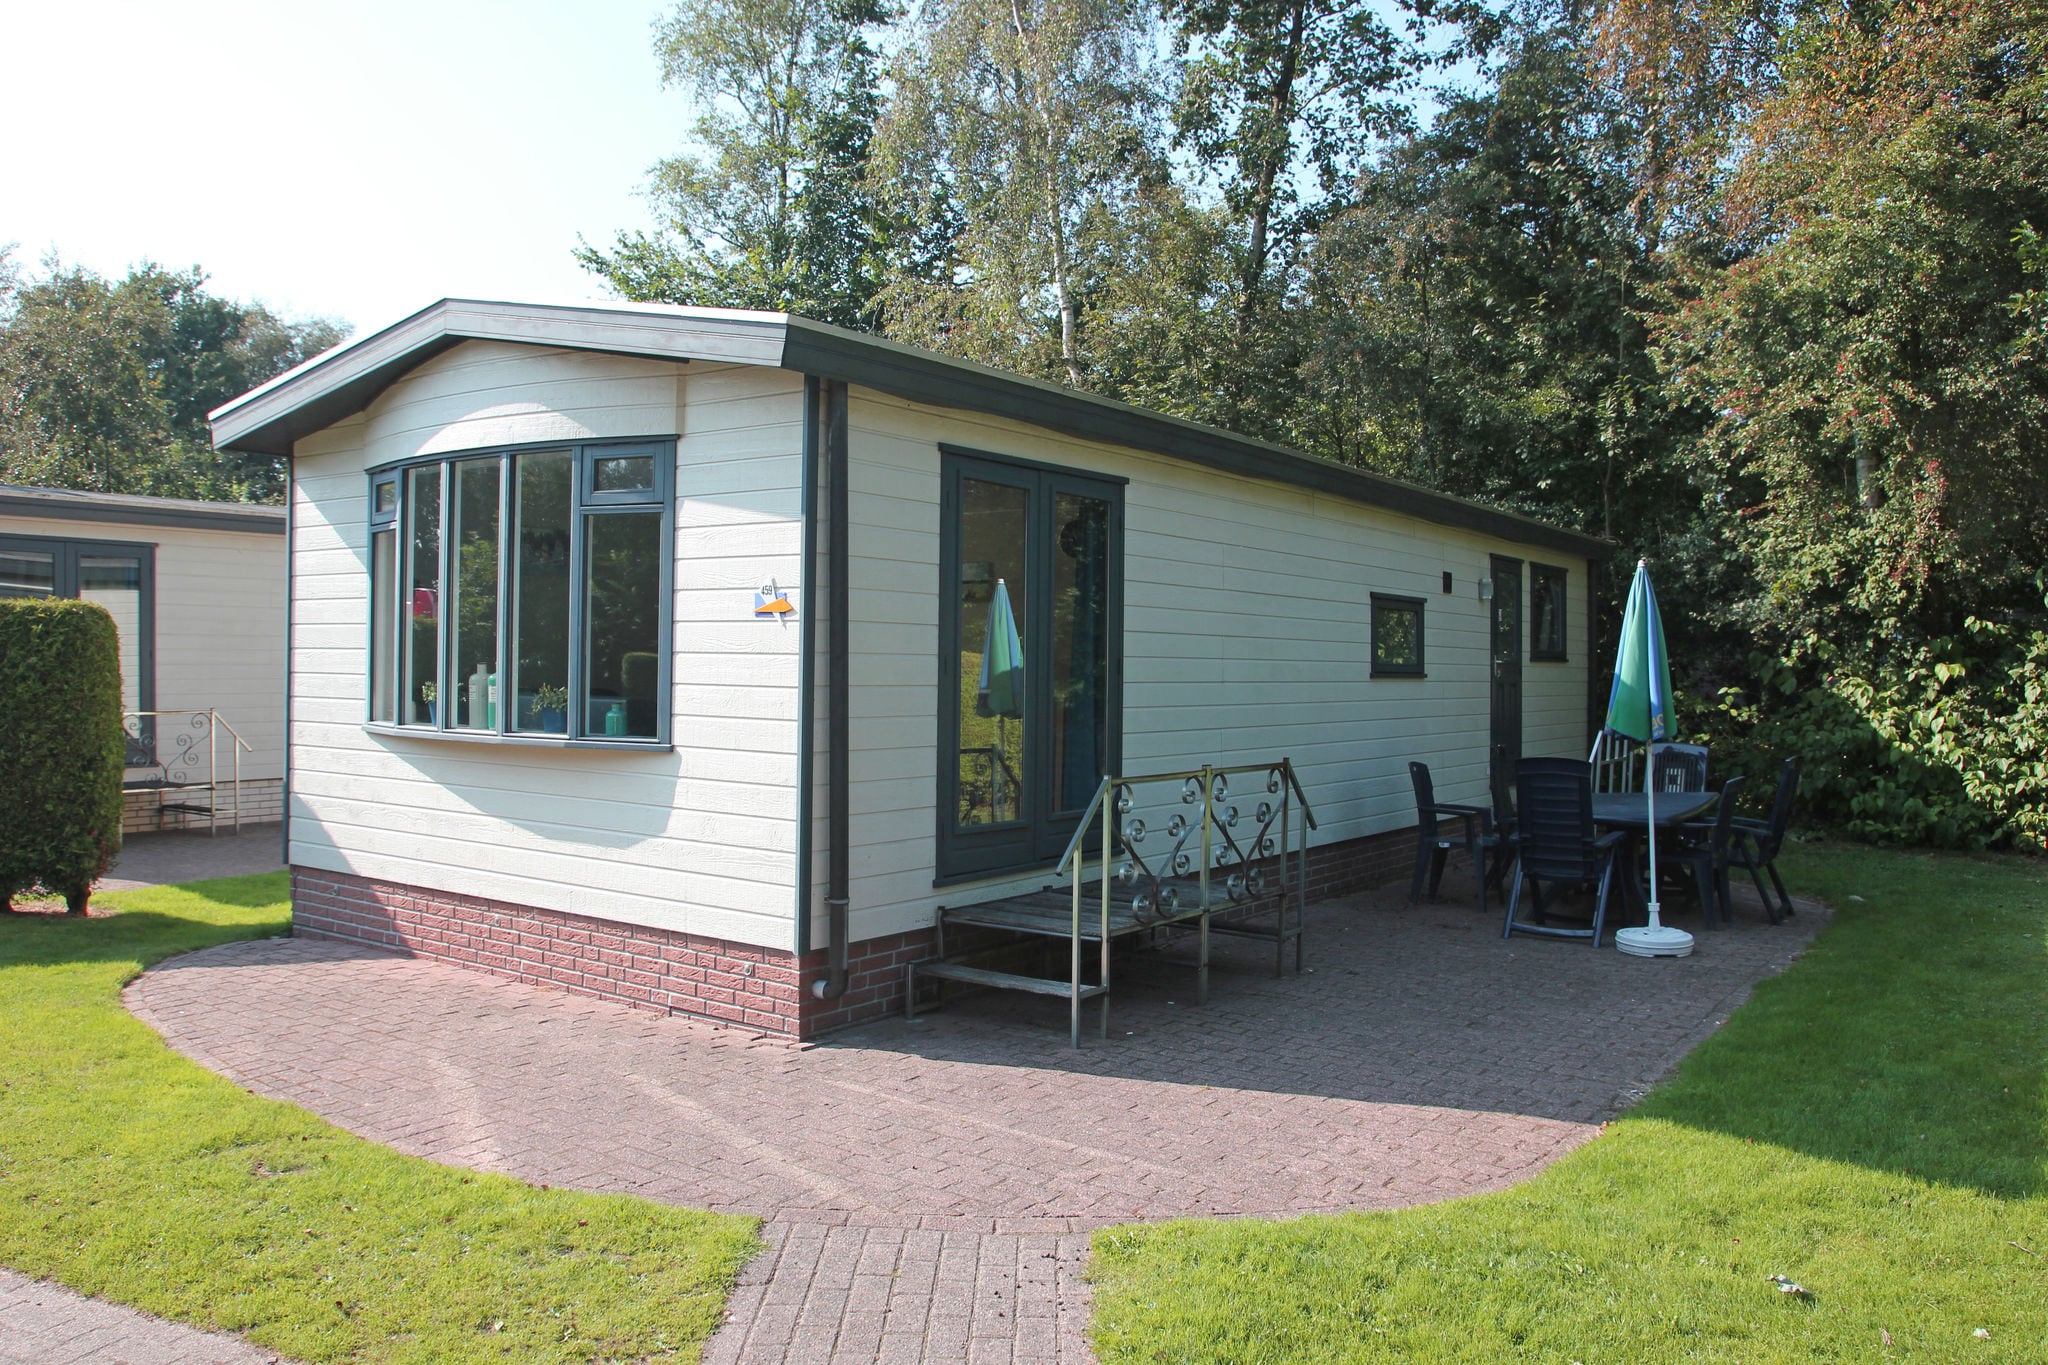 Chalet with dishwasher, 21 km. from Leeuwarden